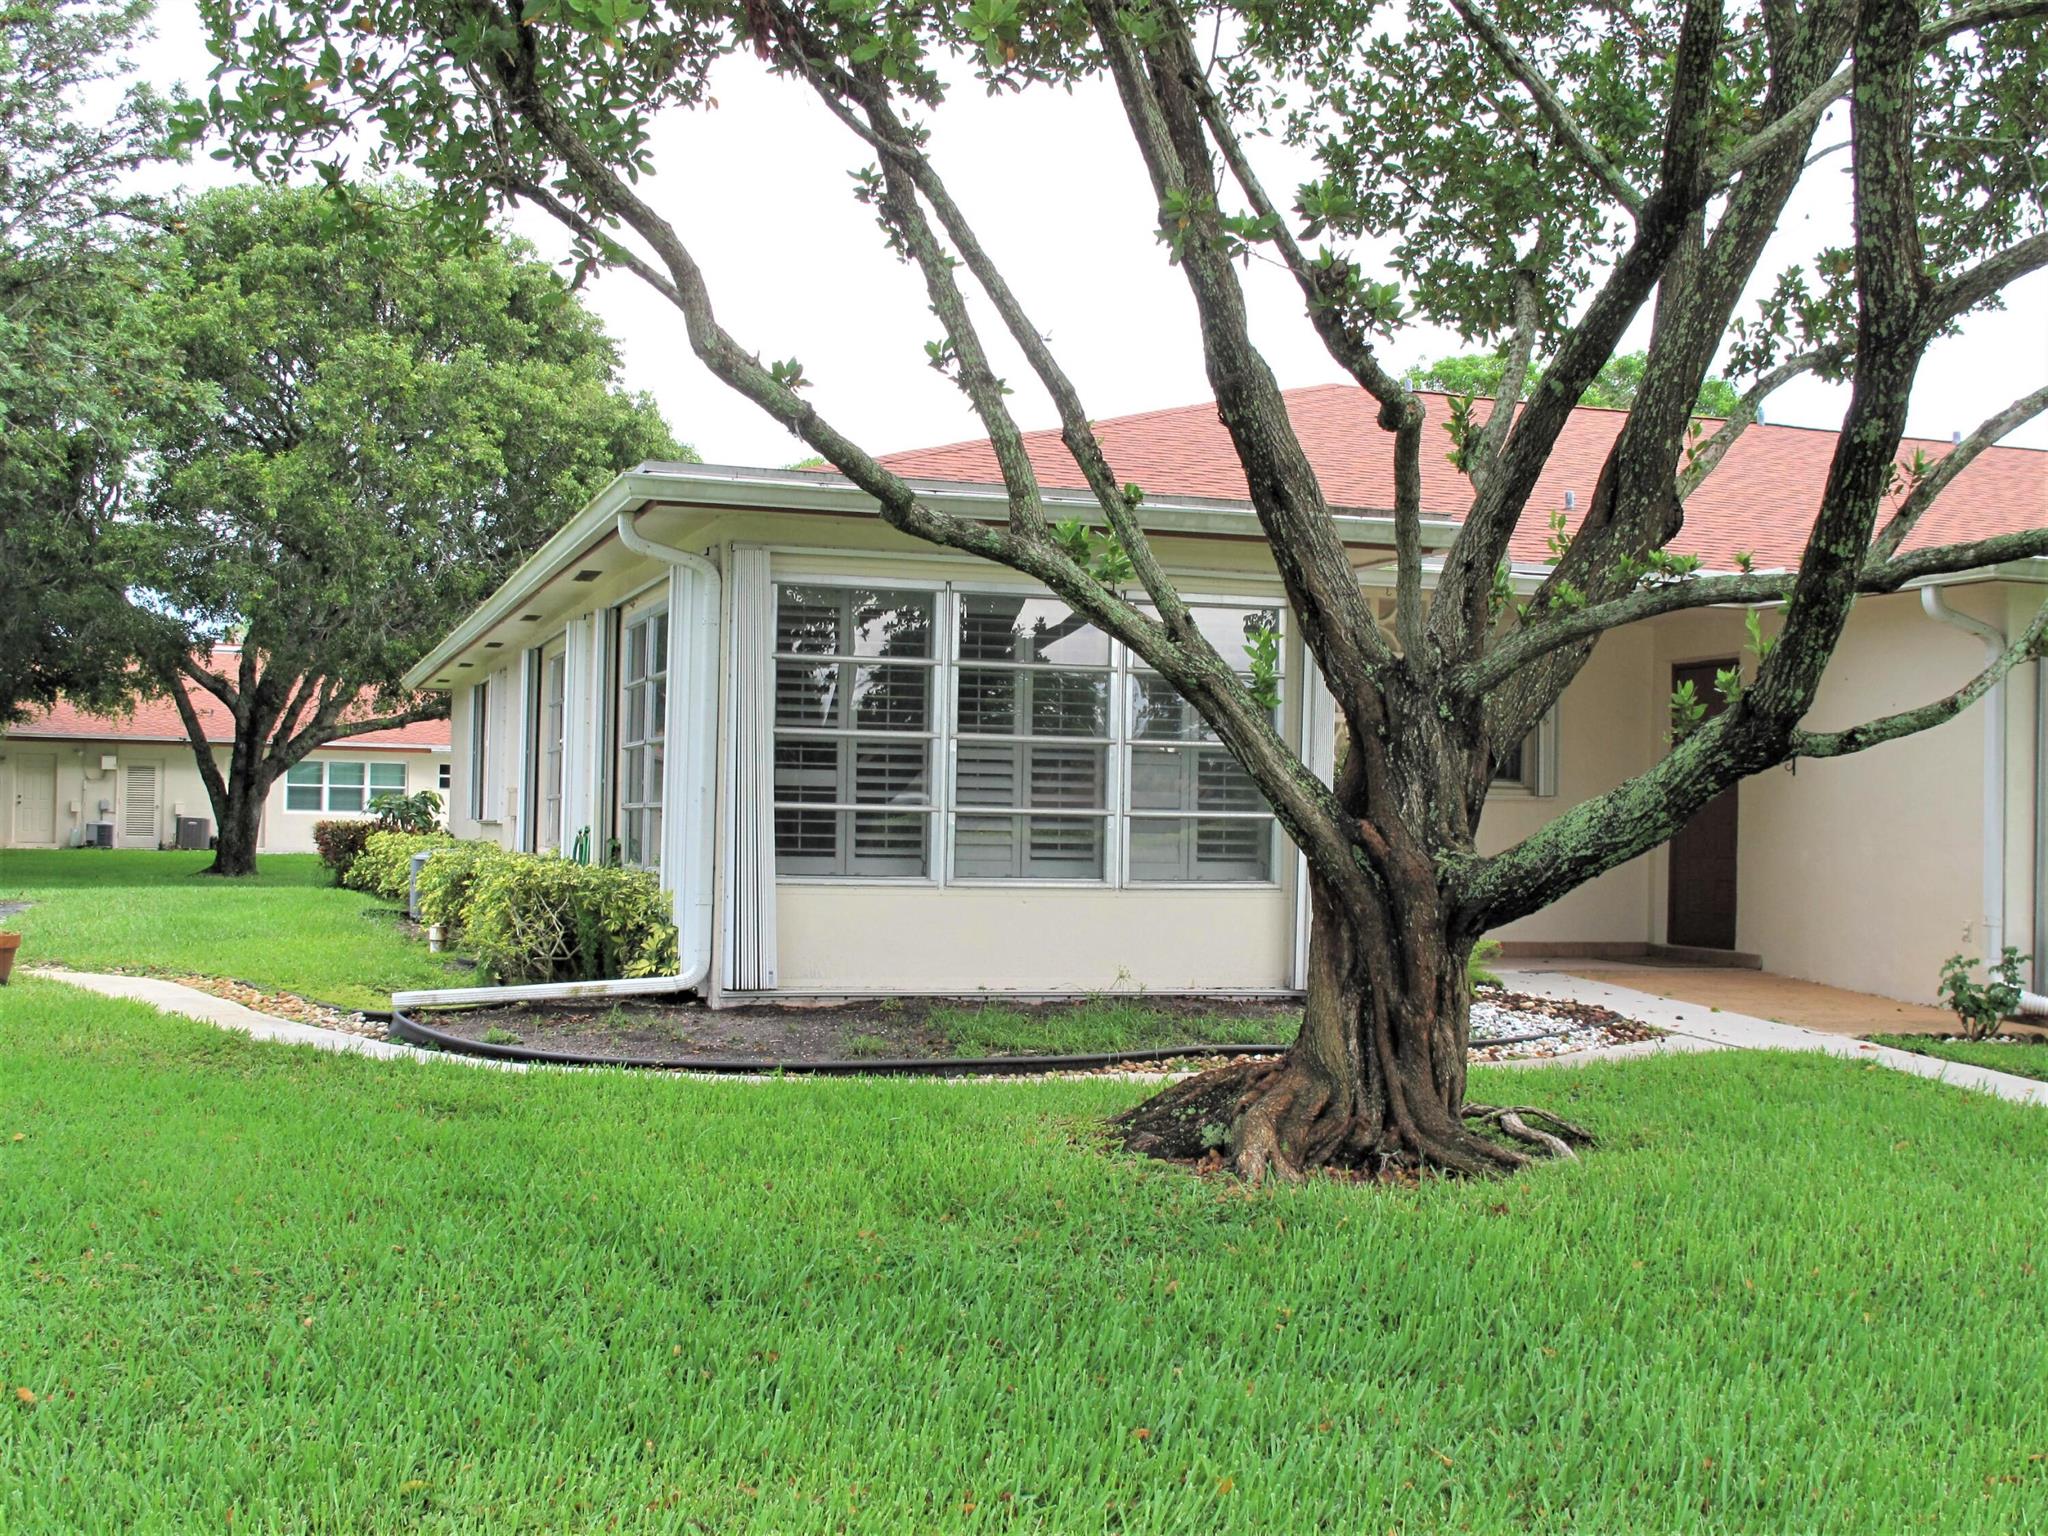 Great location of this remodeled 2BR/2BA corner villa nestled in a 55+ community. Villa features: Accordion shutters on all windows,  Plantation shutters on inside windows, raised floor Florida room under air, maple cabinets in kitchen w/granite counters, SS appliances, garbage disposal, AC 2012/2013 compressor 2007, Crown molding, no popcorn ceilings are smooth, knock down walls, 4 ceiling fans, New shower stalls in both bathrooms, new bathroom vanities w/granite counters, raised panel doors, pull down stairs for attic access, 18x18 neutral tile throughout, neutral carpeting in master bedroom, exterior rain gutters, custom building patio in back yard and custom installed walkway from parking area. New buyers may rent after 2 yrs then only once per year 3-month min. Not a pet friendly community, but medical necessity allowed w/proper documentation. Enjoy Florida living at its best in this very active 55+ community where you'll enjoy many planned social activities, game night, traveling, newly renovated fitness gym, large, heated resort style pool and clubhouse and so much more. Located close to all amenities, just minutes to the beach and downtown Delray where you'll discover quaint shops, open-air cafes, fine restaurants, shopping malls, theater, close to I95/Turnpike and Places of worship. You'll find a coin operated washer and dryer in each building of 4 units. 

 **All information is deemed reliable but not guaranteed and subject to change without notice. **